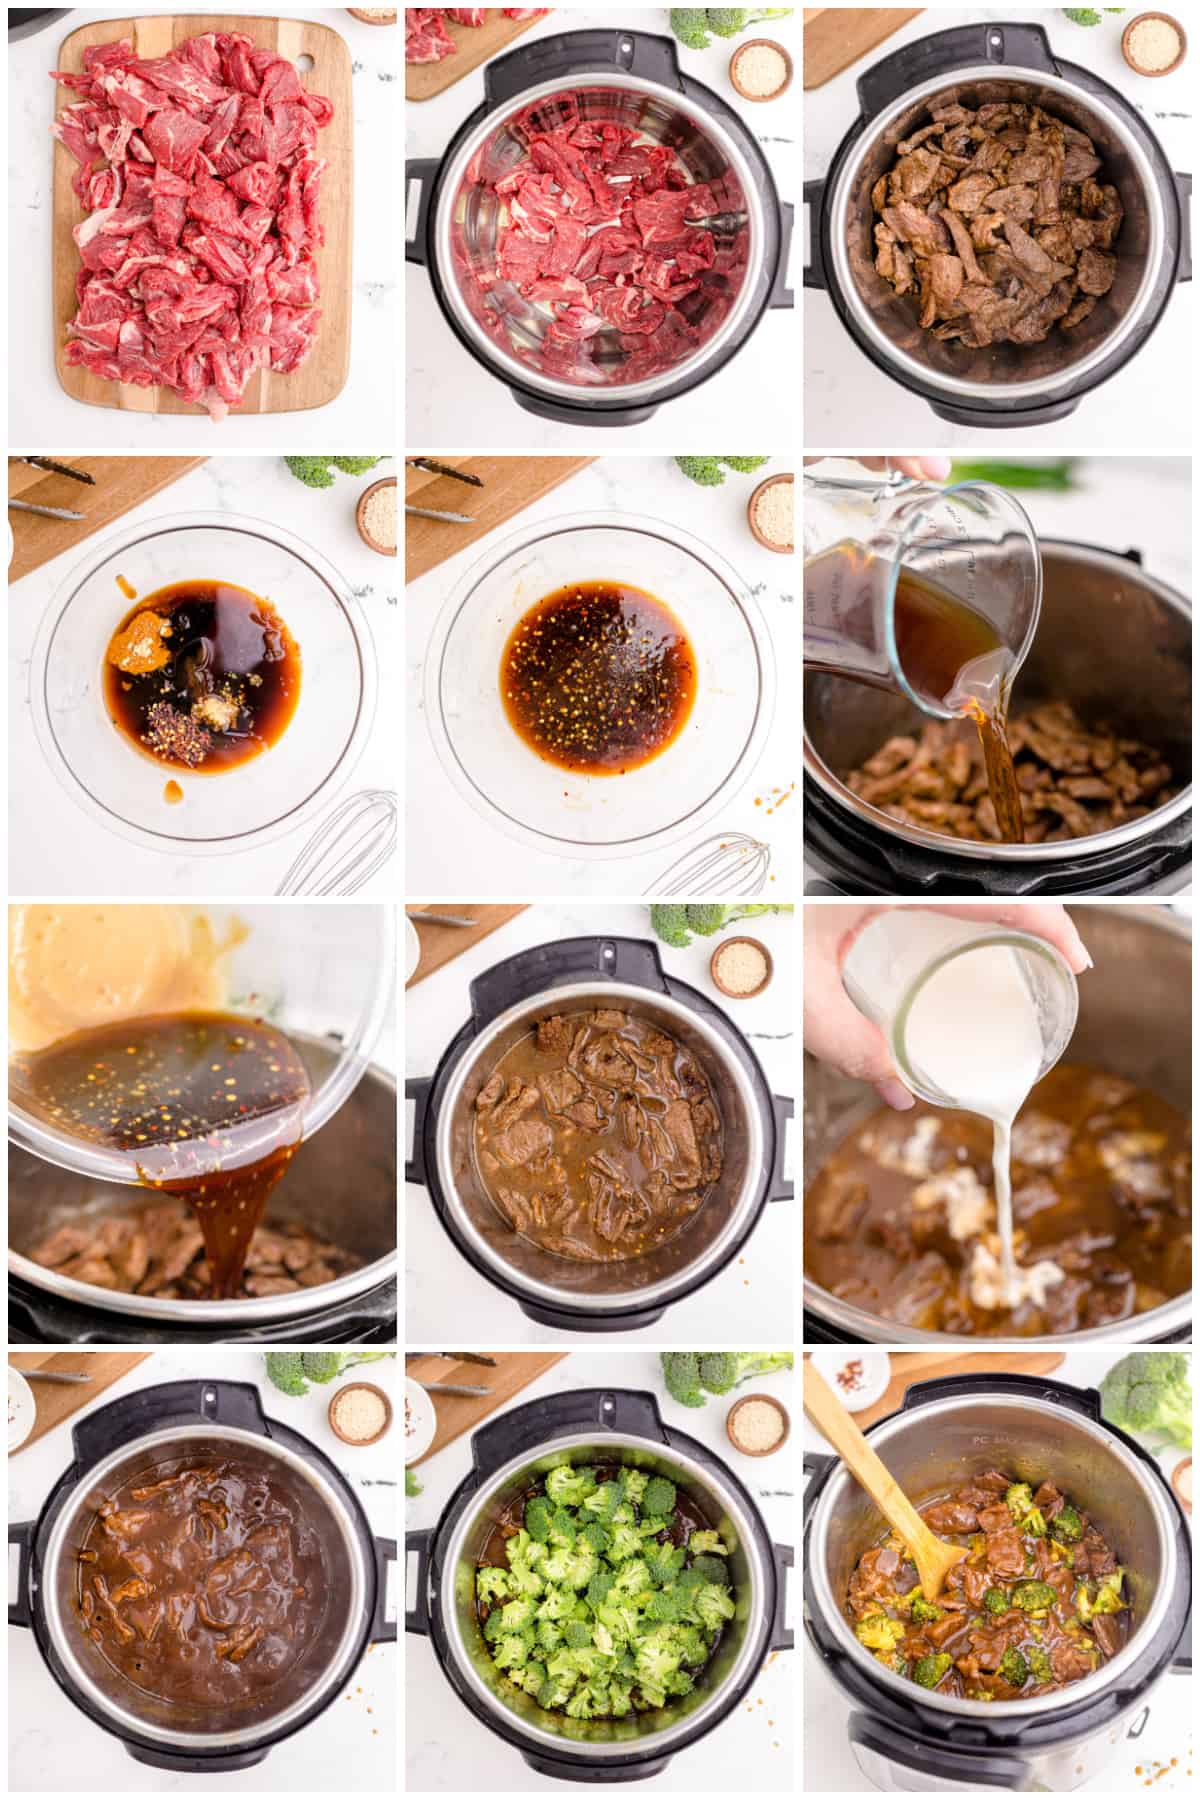 Step by step photos on how to make Instant Pot Beef and Broccoli.